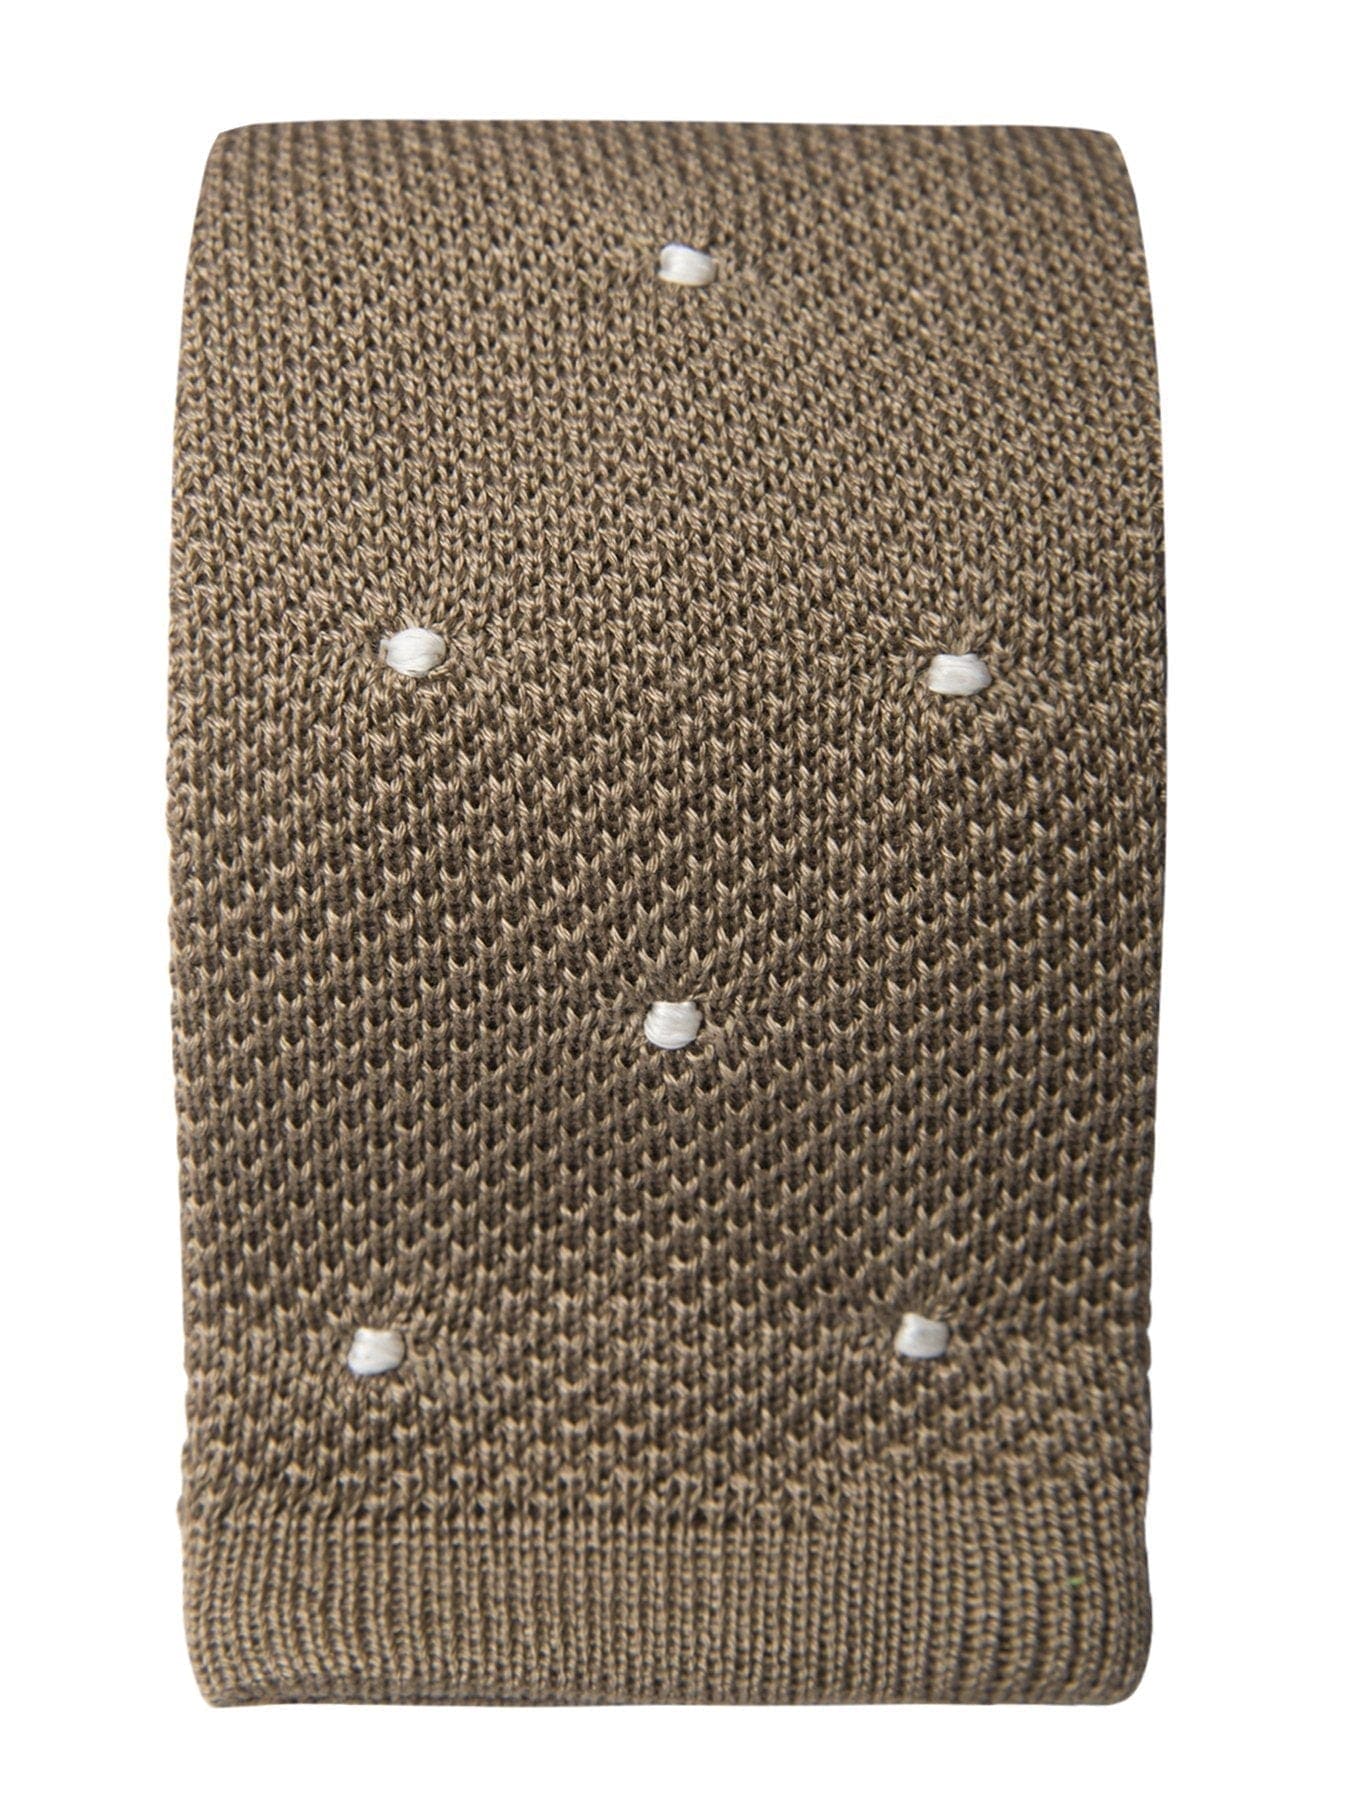 Brown Cotton Tie with White Spots